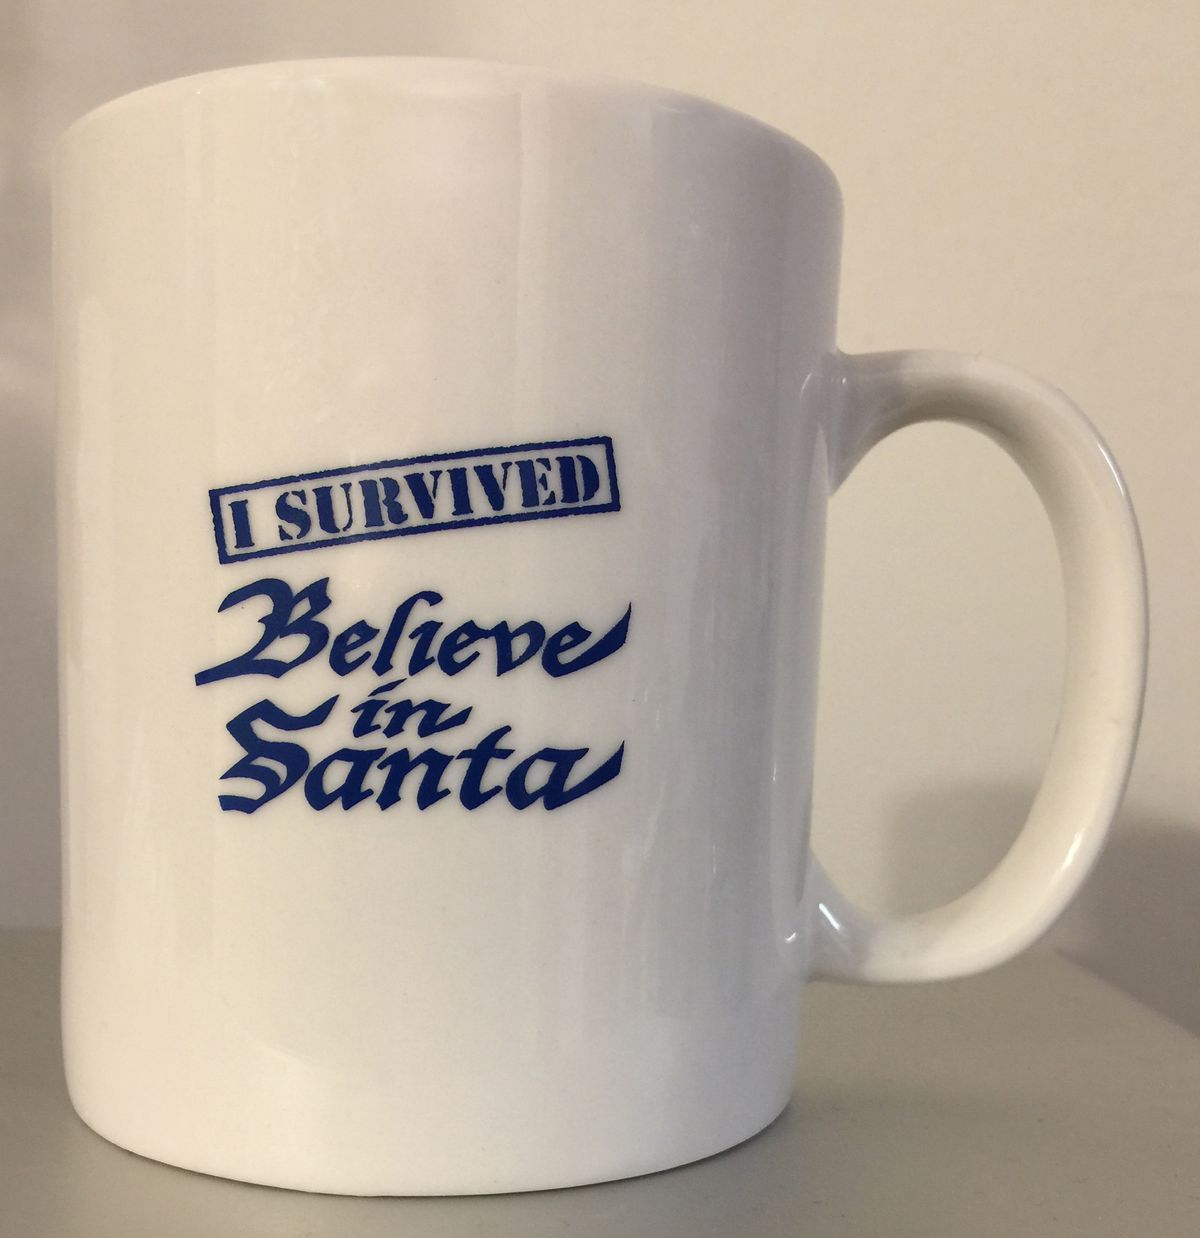 a cream-colored mug saying “I survived Believe in Santa”